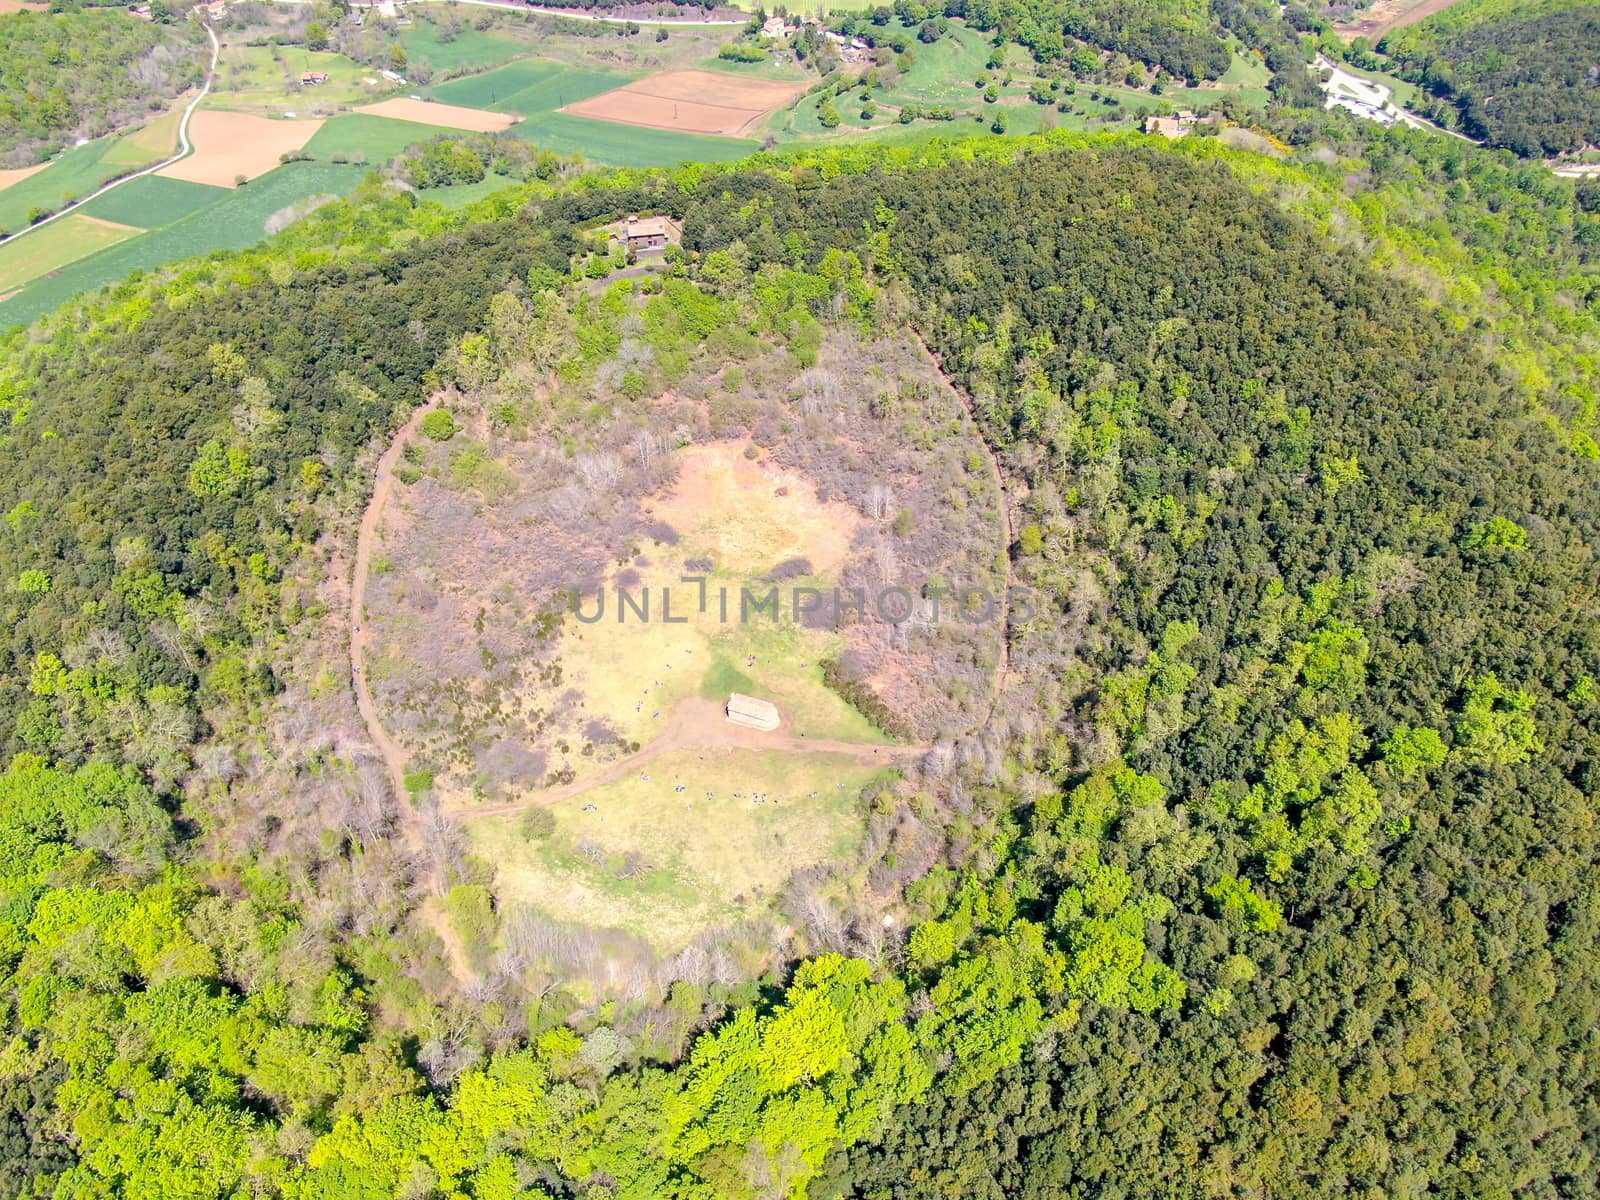 The Santa Margarida Volcano is an extinct volcano in the comarca of Garrotxa, Catalonia, Spain. The volcano has a perimeter of 2 km and a height of 682 meters in Garrotxa Volcanic Zone Natural Park